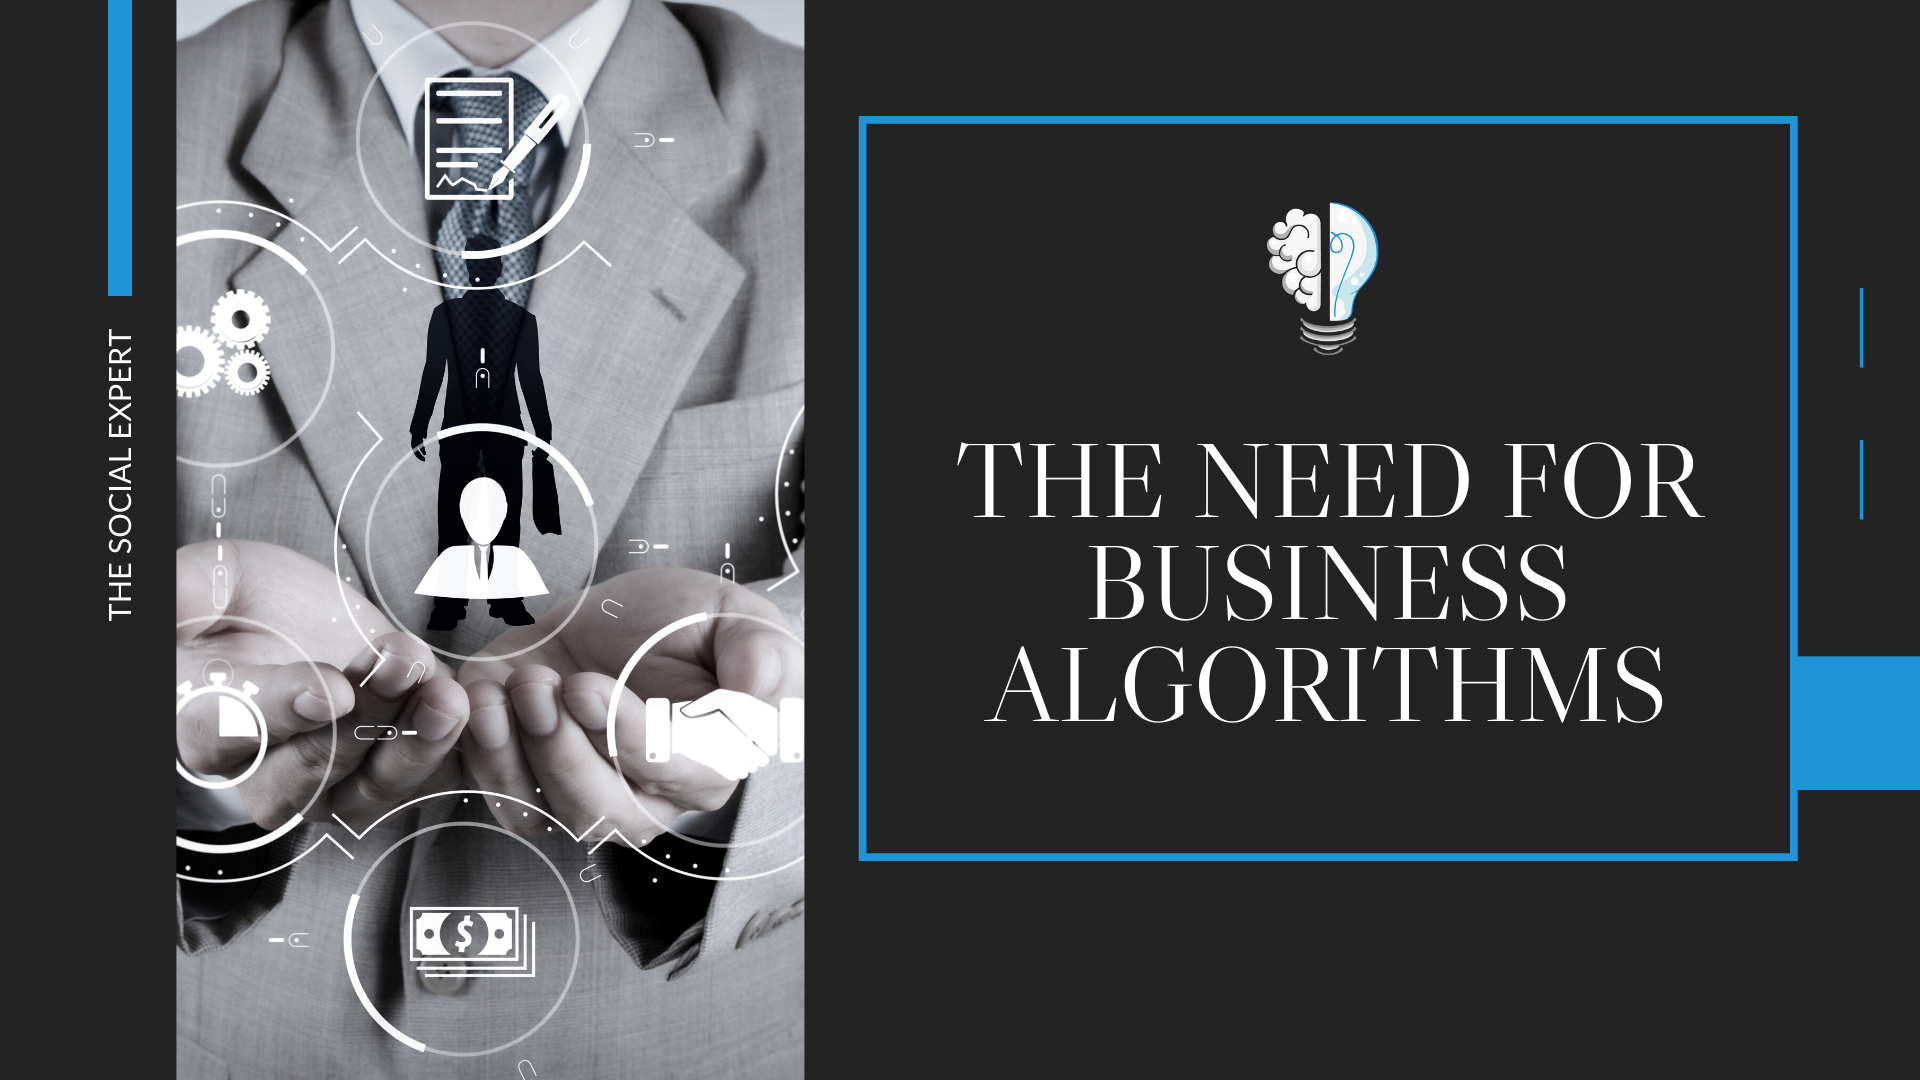 The Need for Business Algorithms